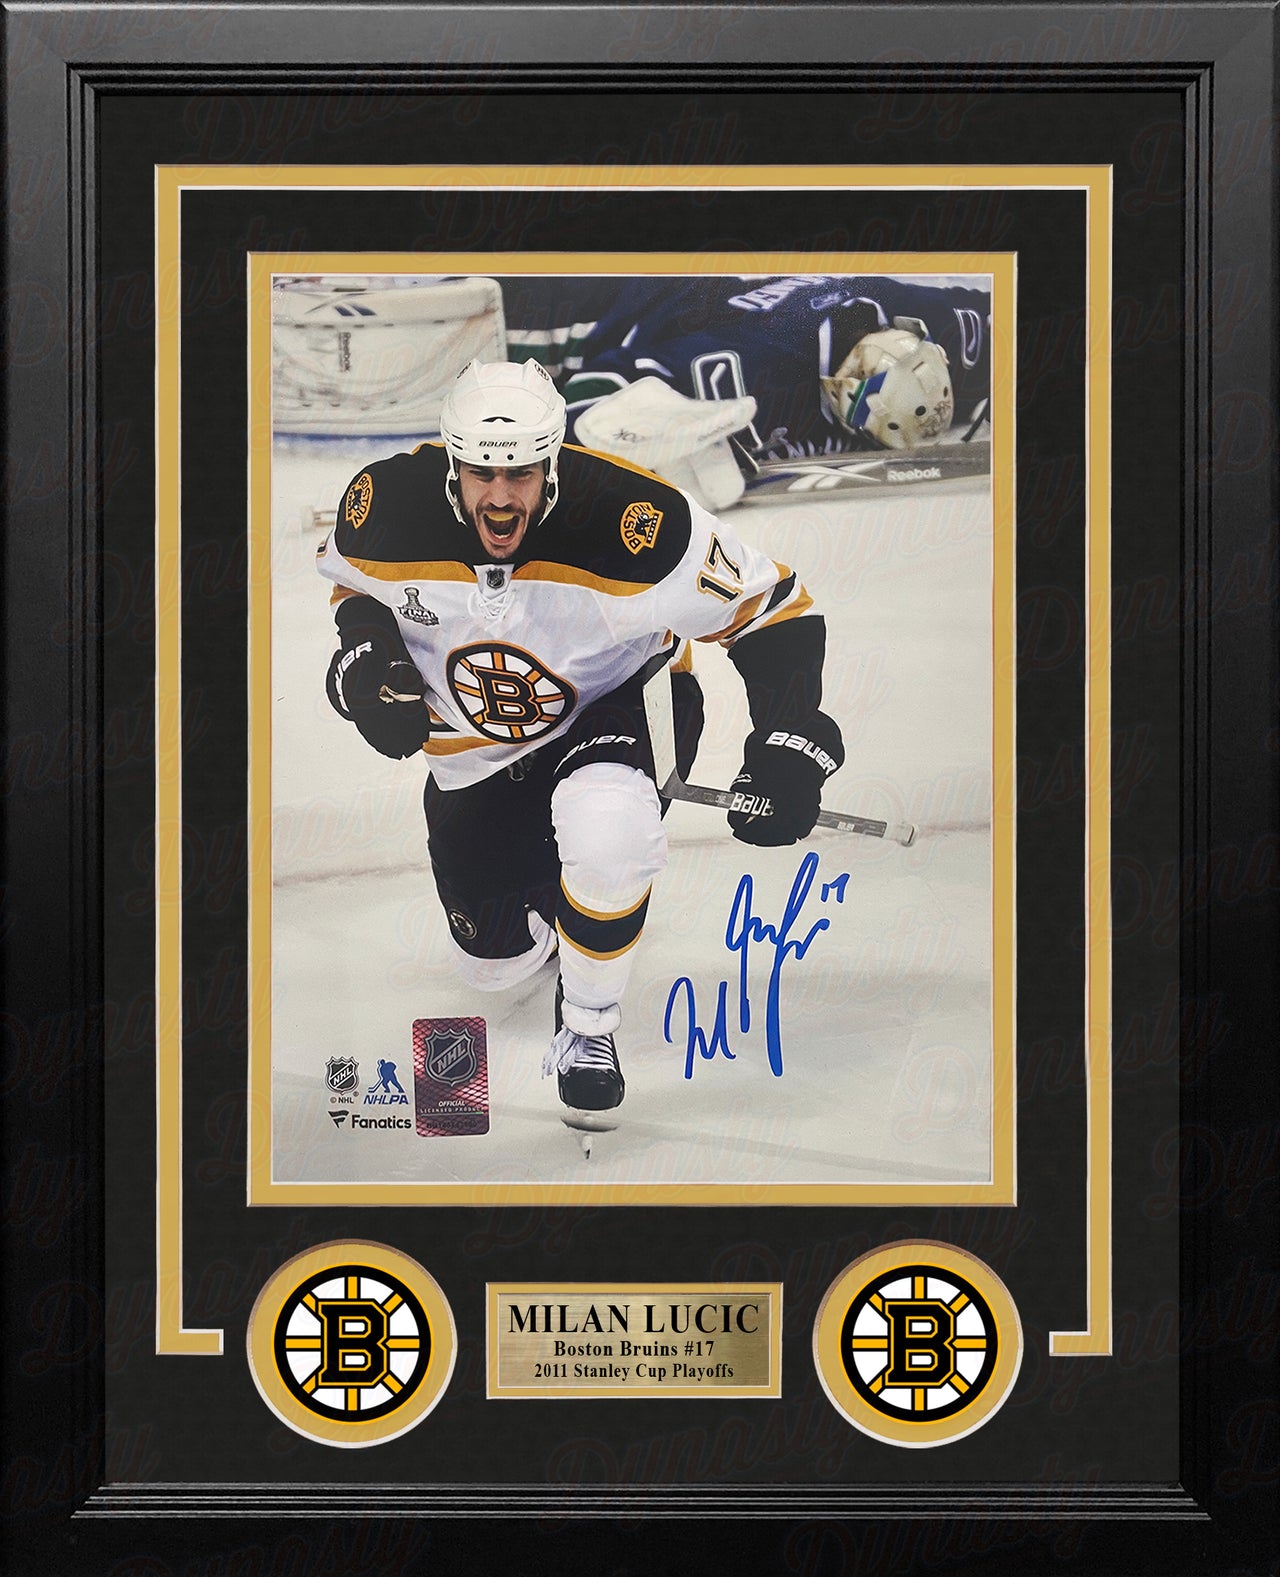 Milan Lucic Stanley Cup Goal Celebration Boston Bruins Autographed 8" x 10" Framed Hockey Photo